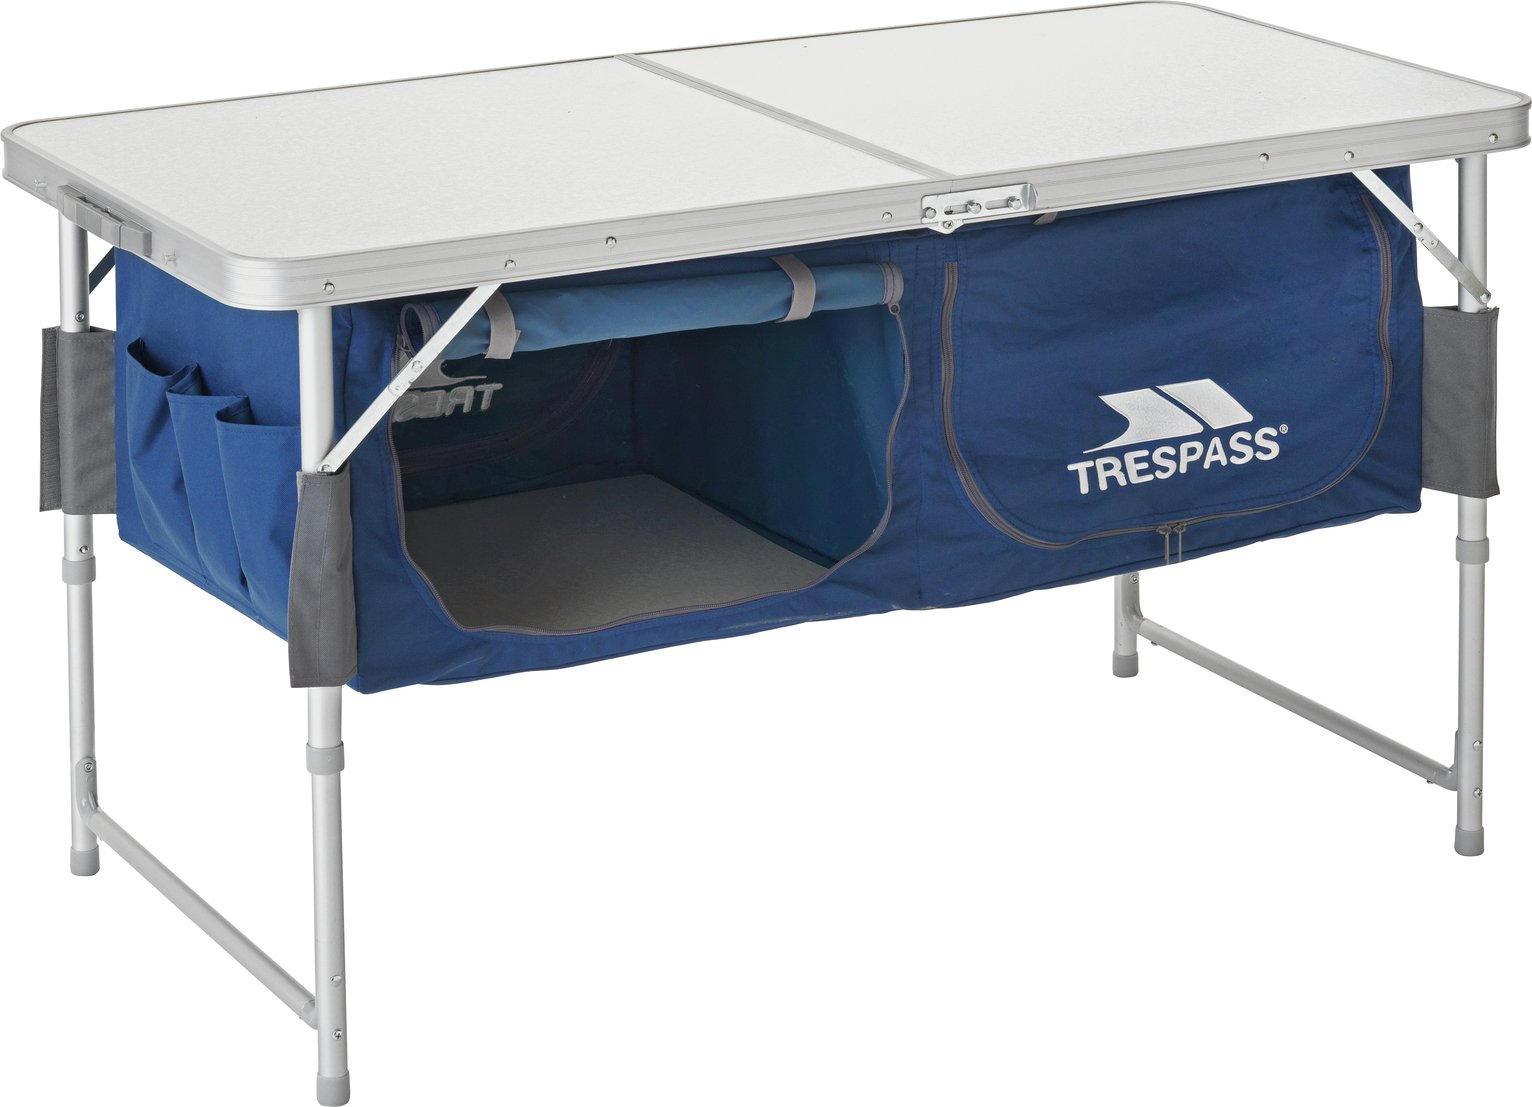 Trespass Camping Table with Storage